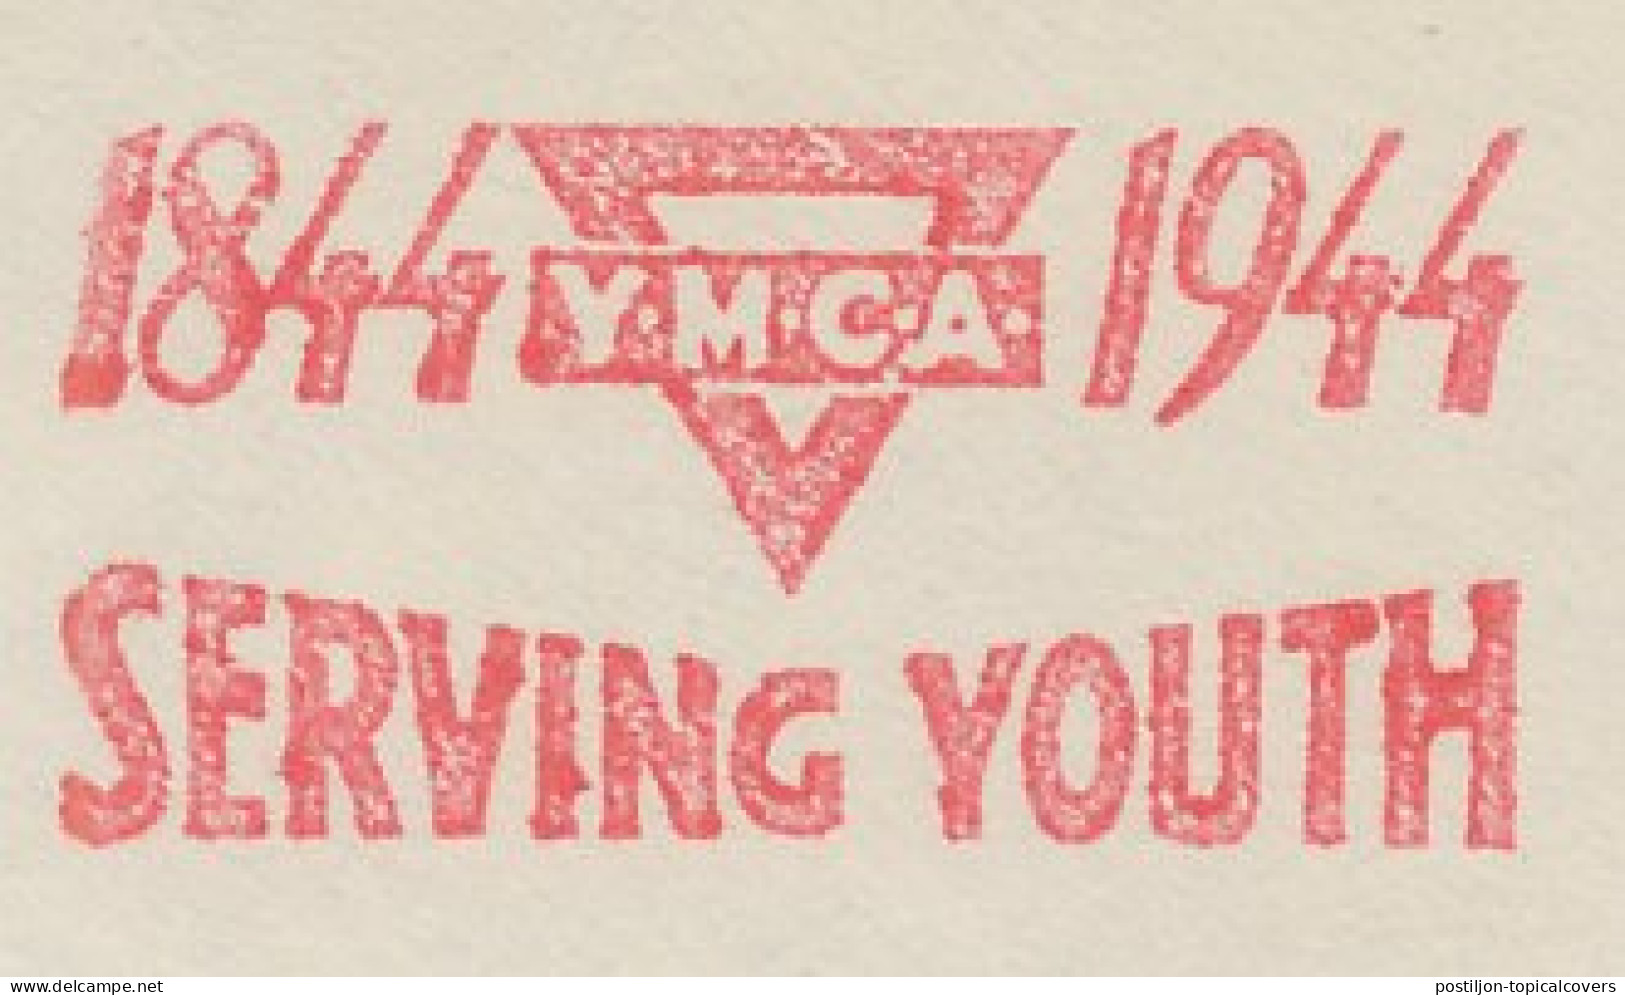 Meter Top Cut USA 1944 YMCA - 100 Years Serving Youth - Other & Unclassified